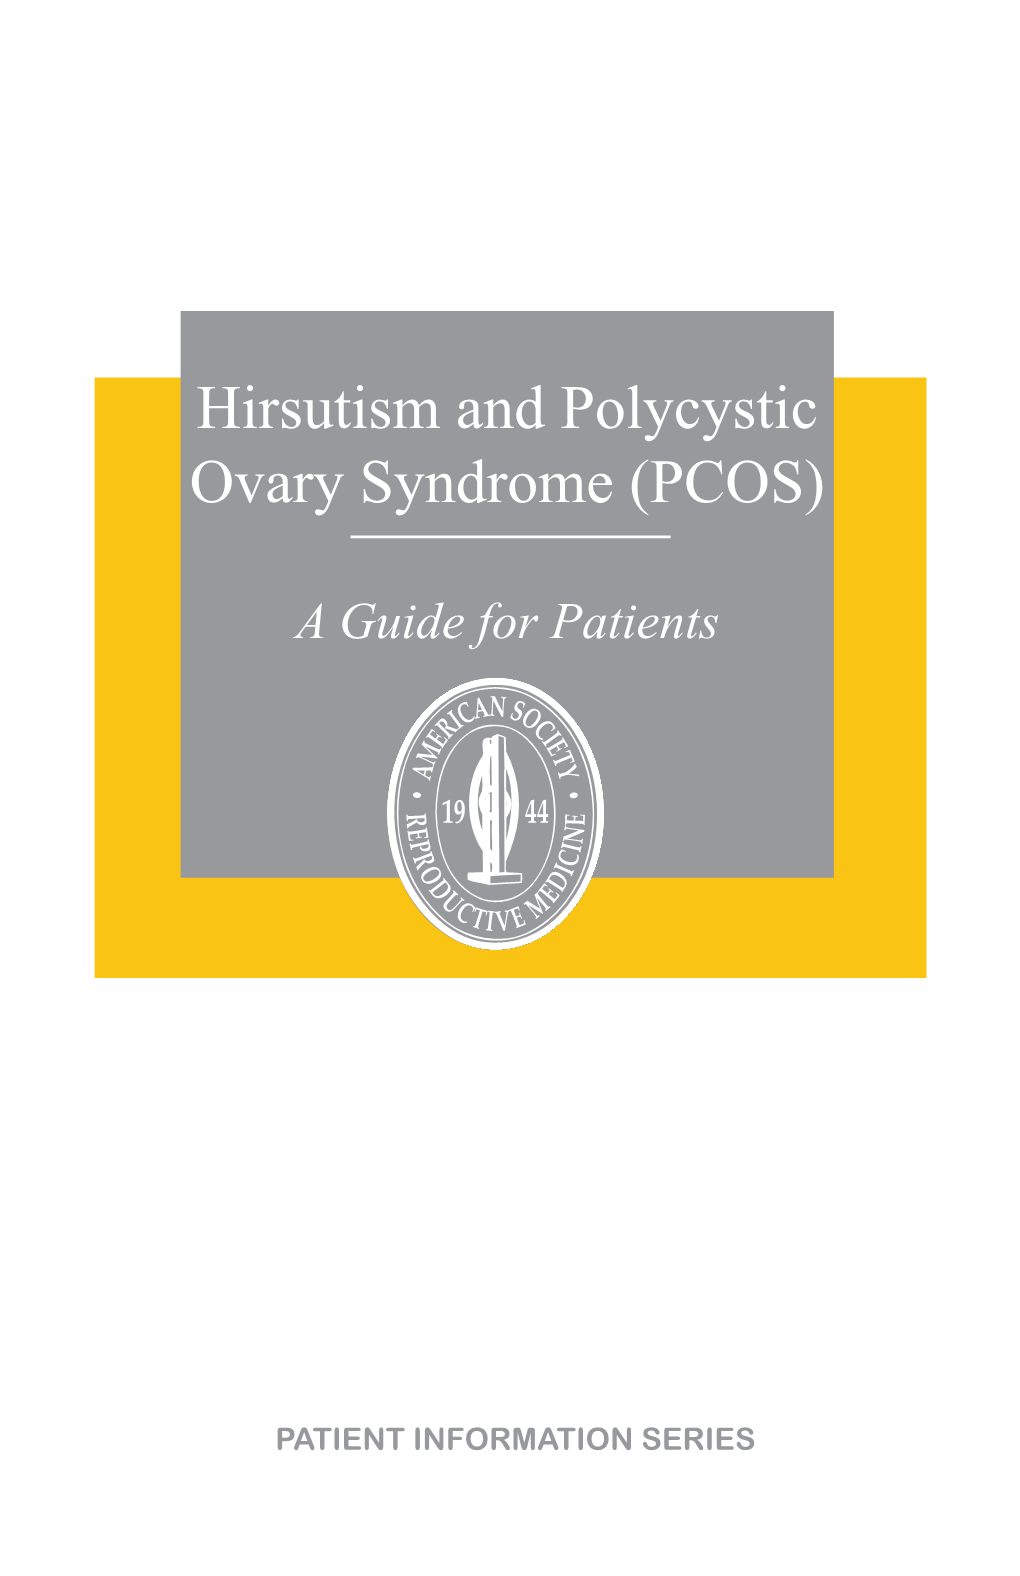 Hirsutism and Polycystic Ovary Syndrome (PCOS)